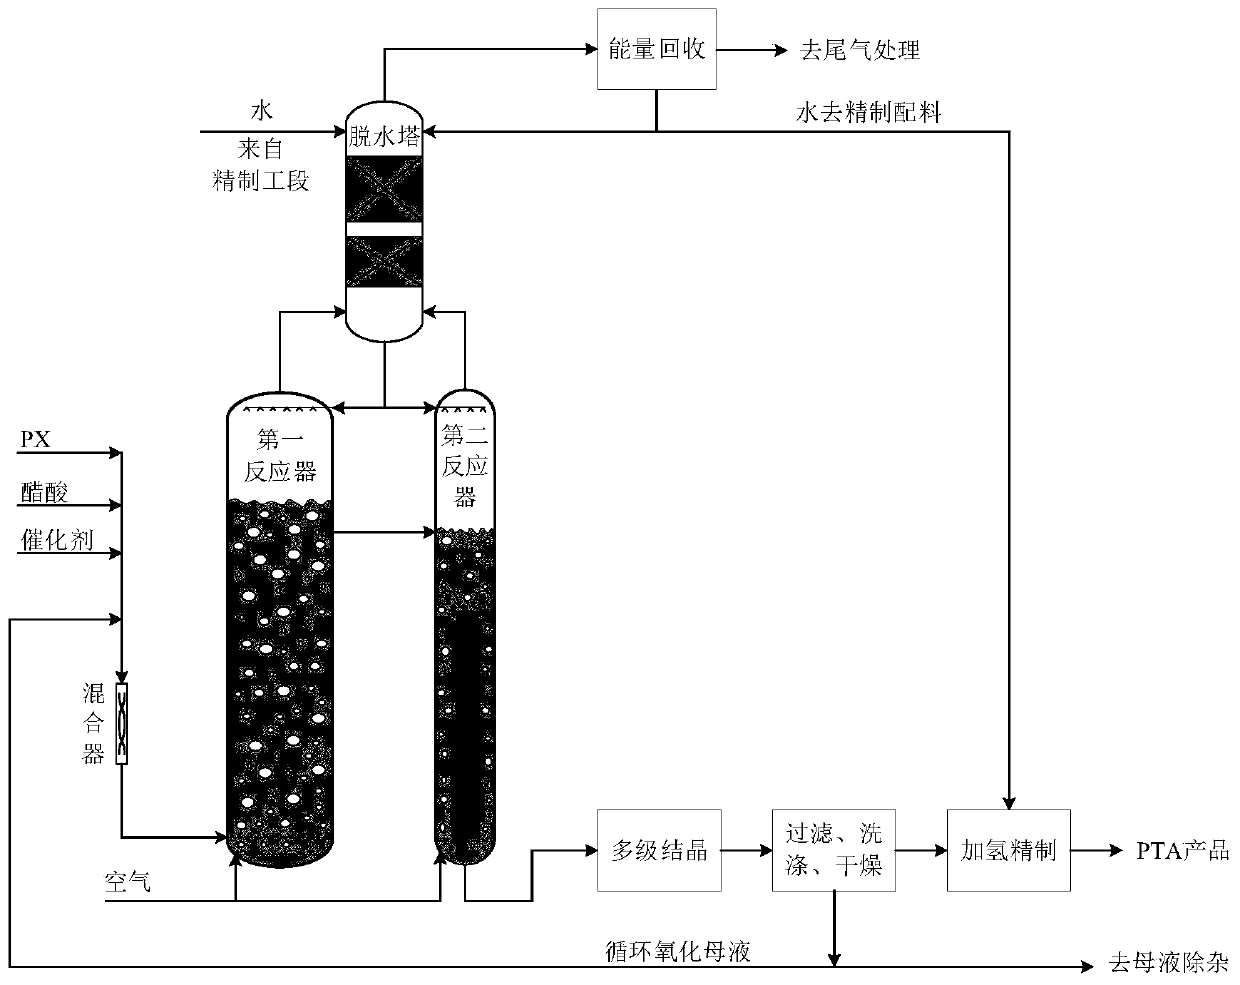 Double bubble column reaction device used for oxidizing p-xylene and reaction process